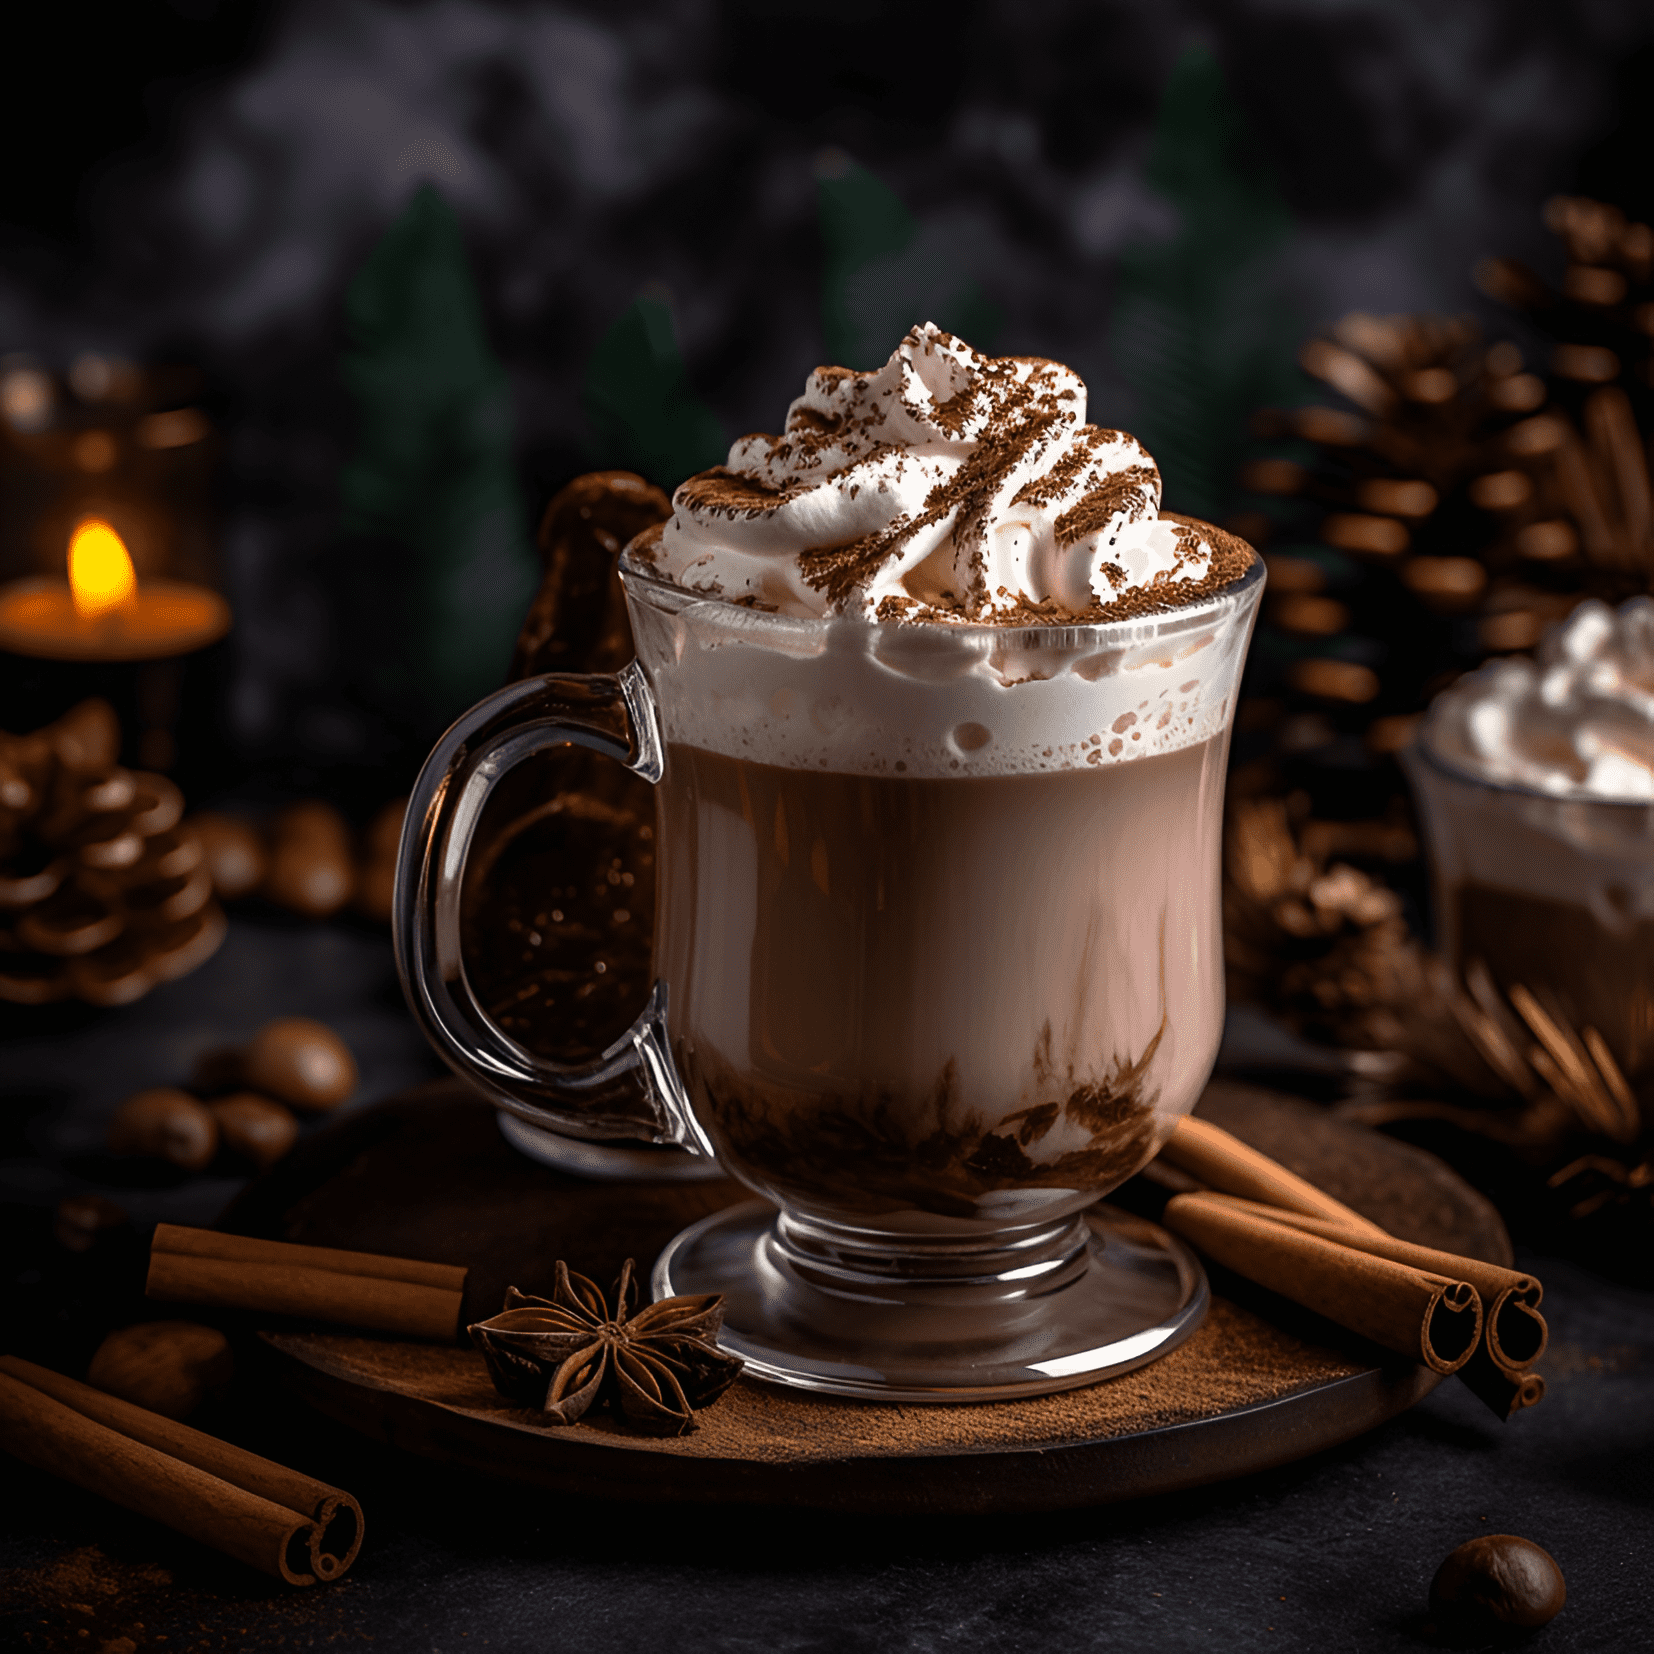 Spiked Hot Chocolate Cocktail Recipe - The Spiked Hot Chocolate cocktail is rich, creamy, and sweet with a hint of warmth from the added alcohol. The chocolate and whipped cream create a velvety smooth texture, while the spices and alcohol provide a subtle, warming heat.